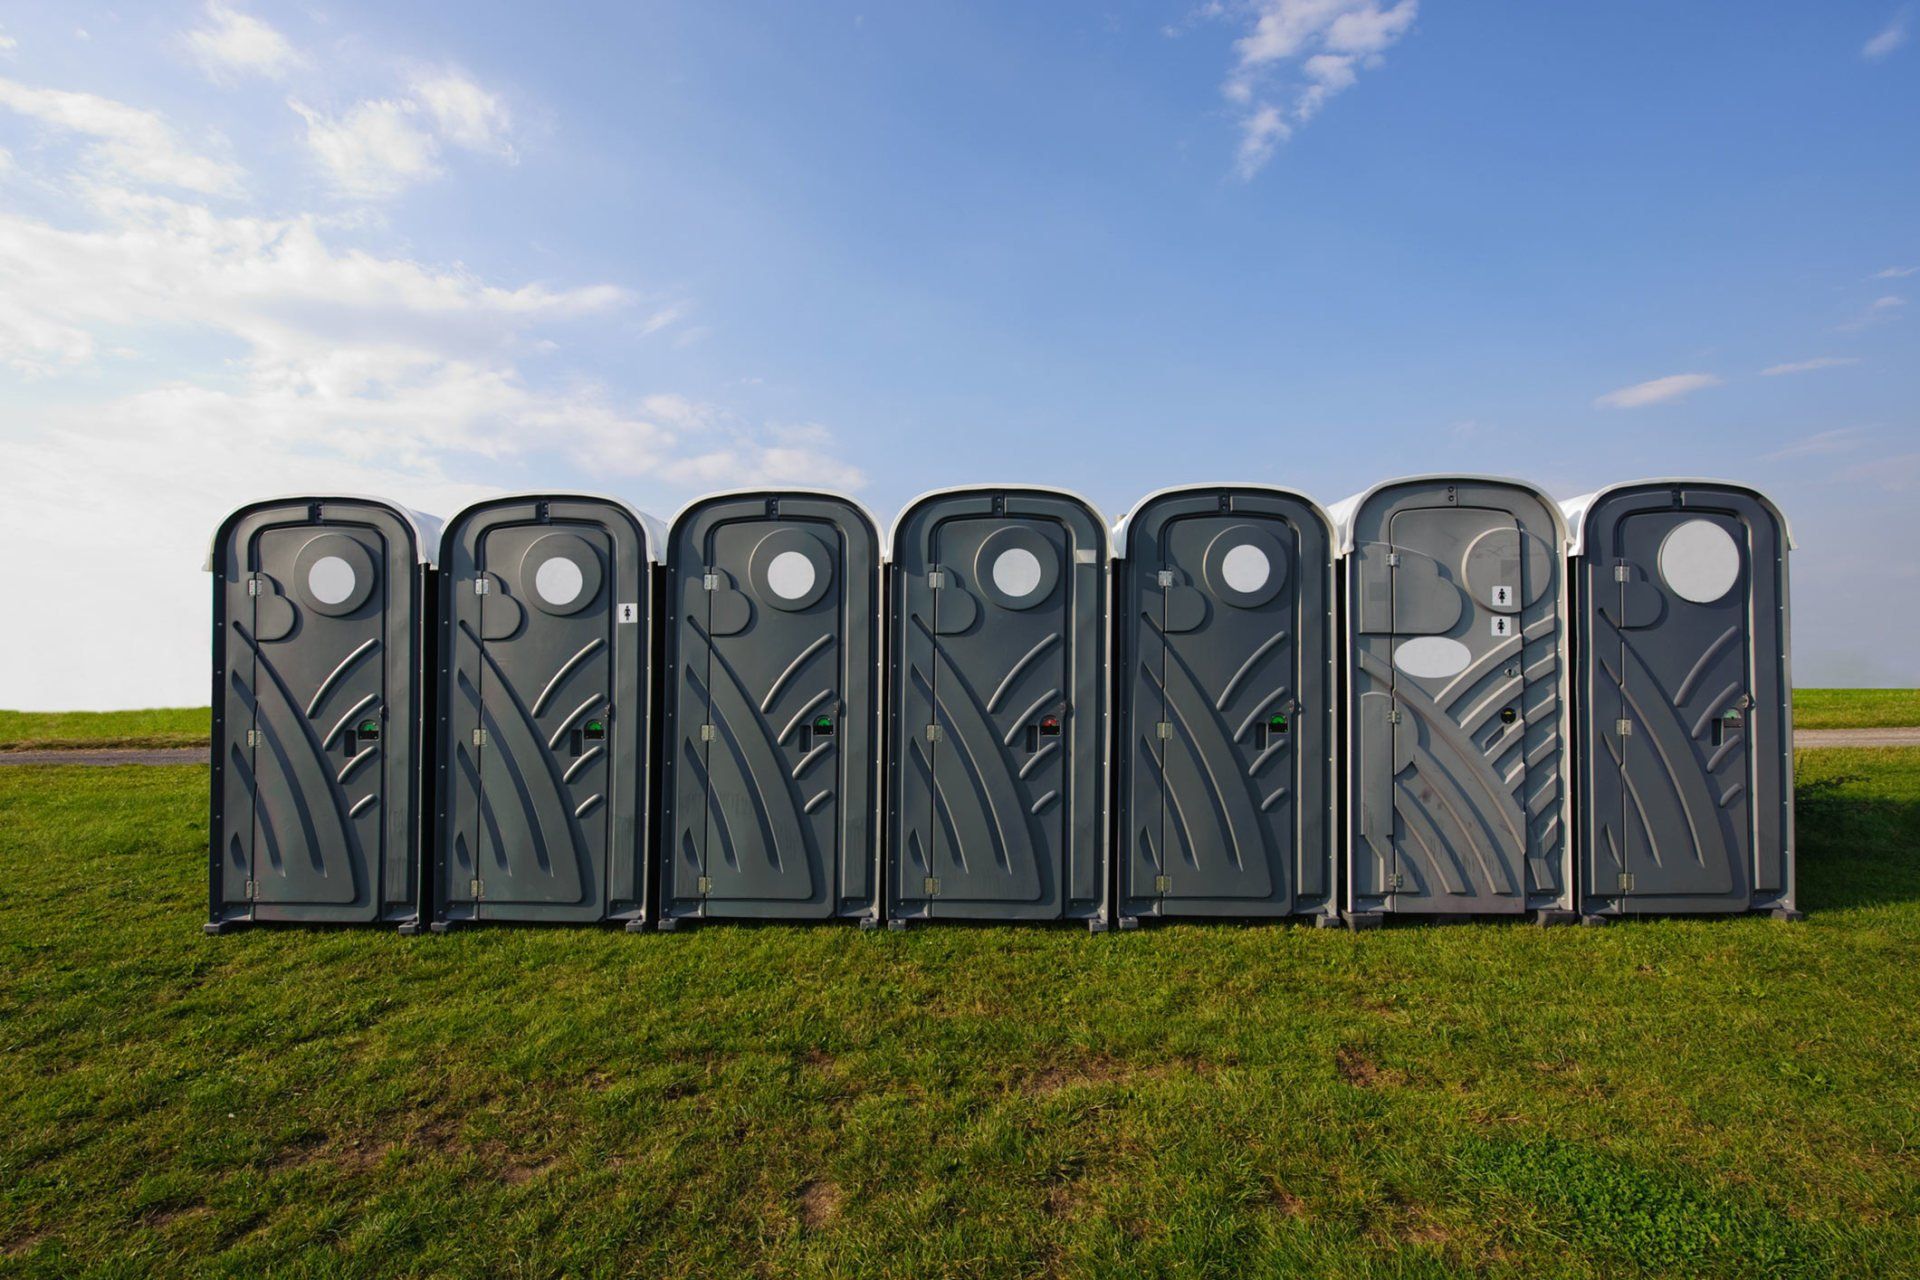 A row of portable toilets for waste management services in Lynchburg, VA